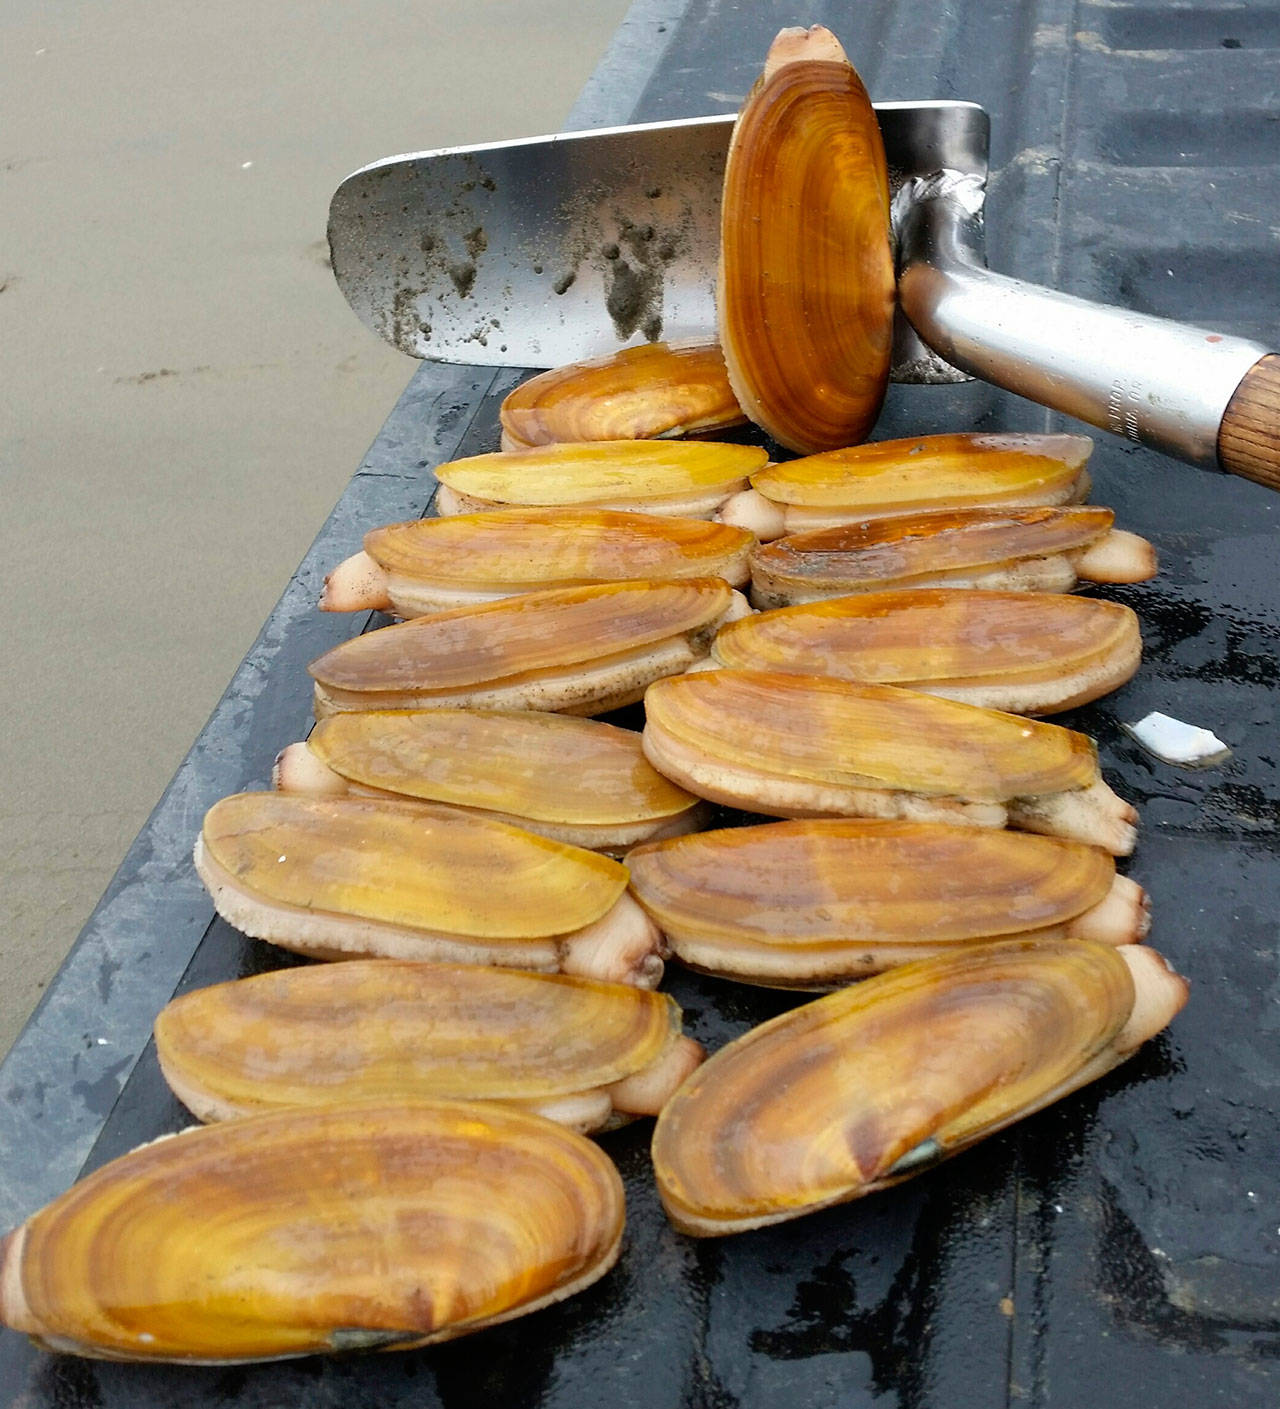 A total of 39 razor clam digs have been scheduled for ocean beaches this fall and winter. (Washington Department of Fish and Wildlife)